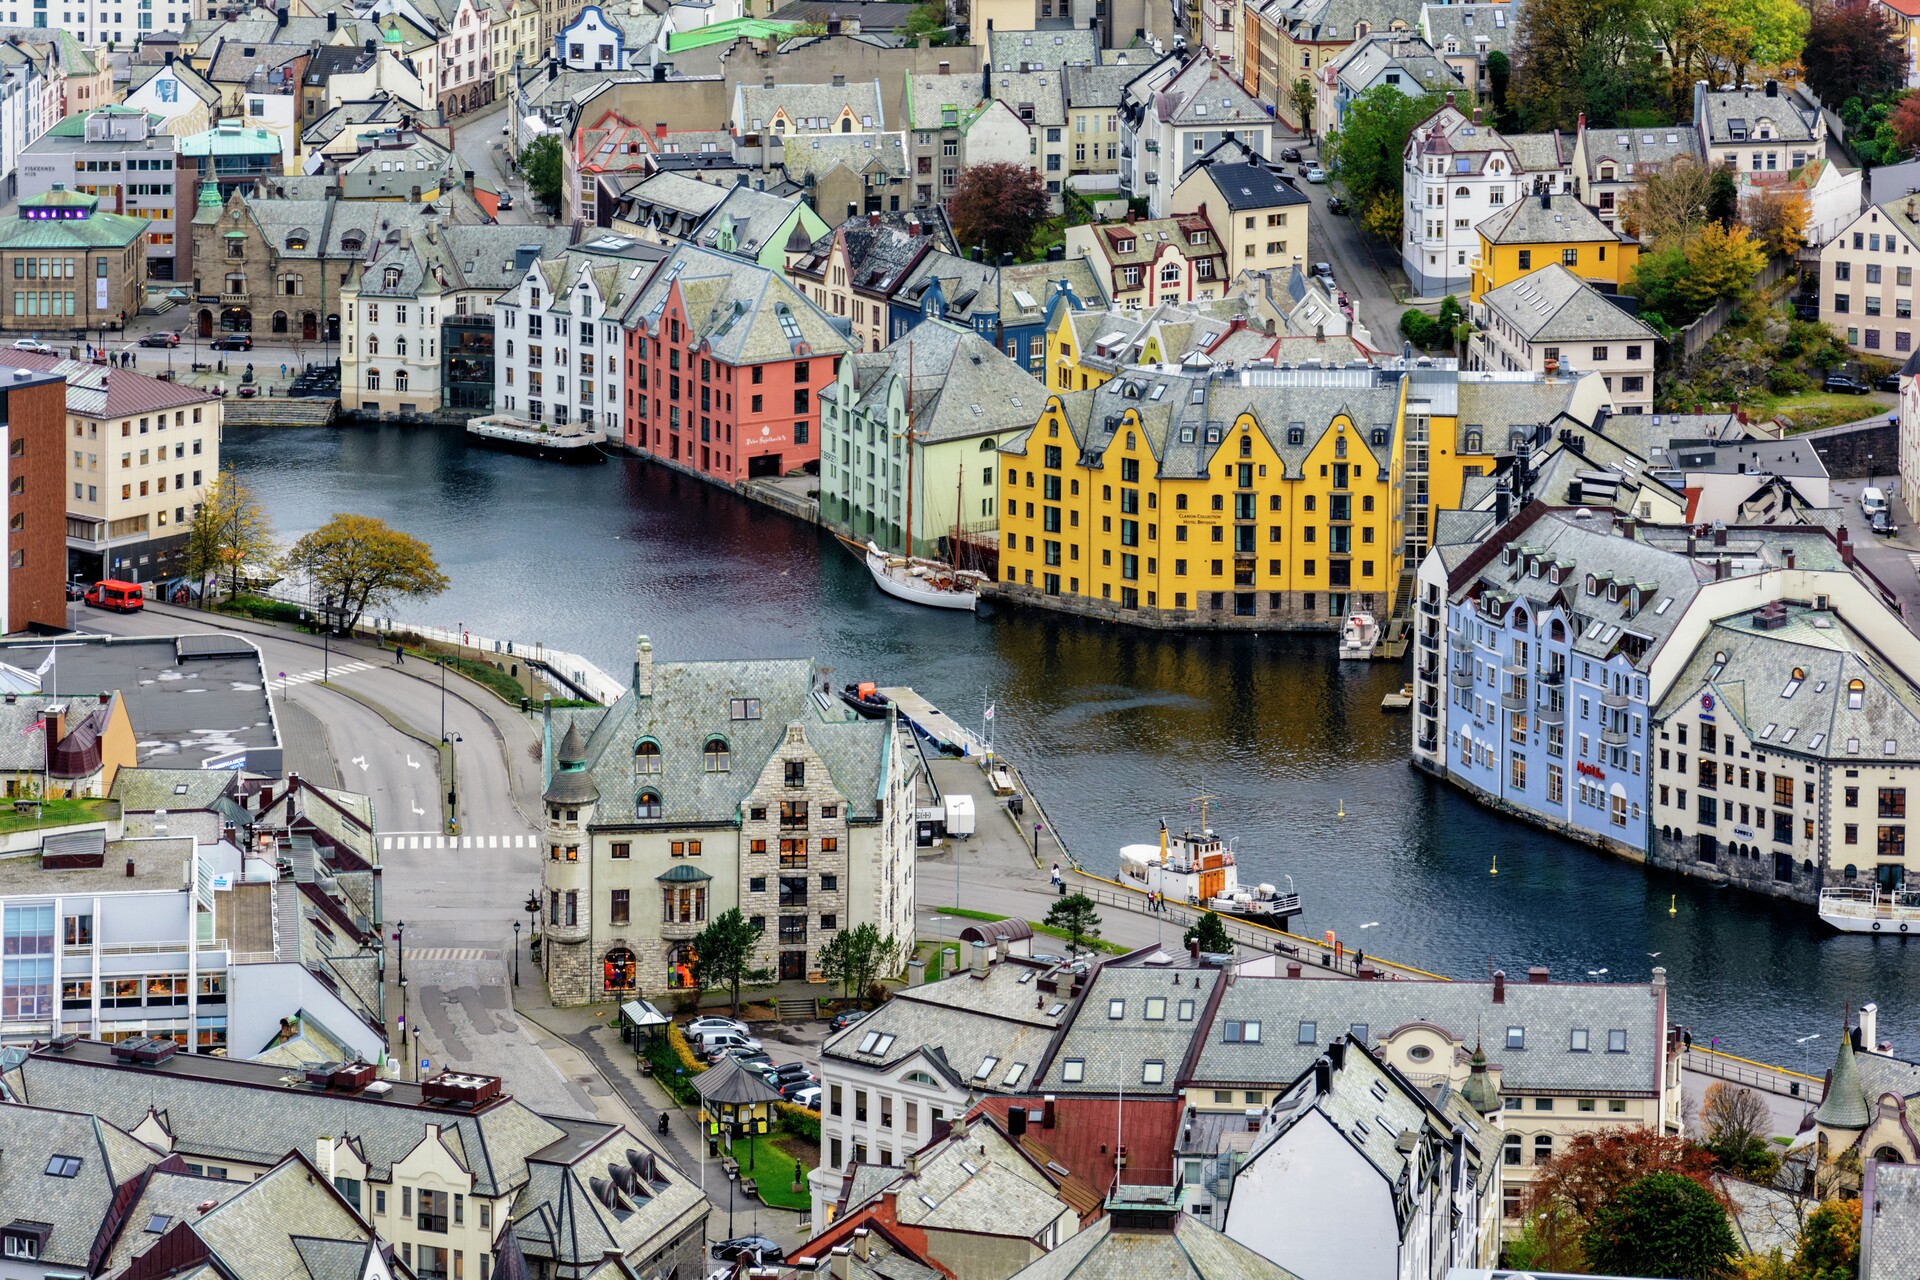 Save up to $1200 on Hurtigruten's Norway Early Bird Sale